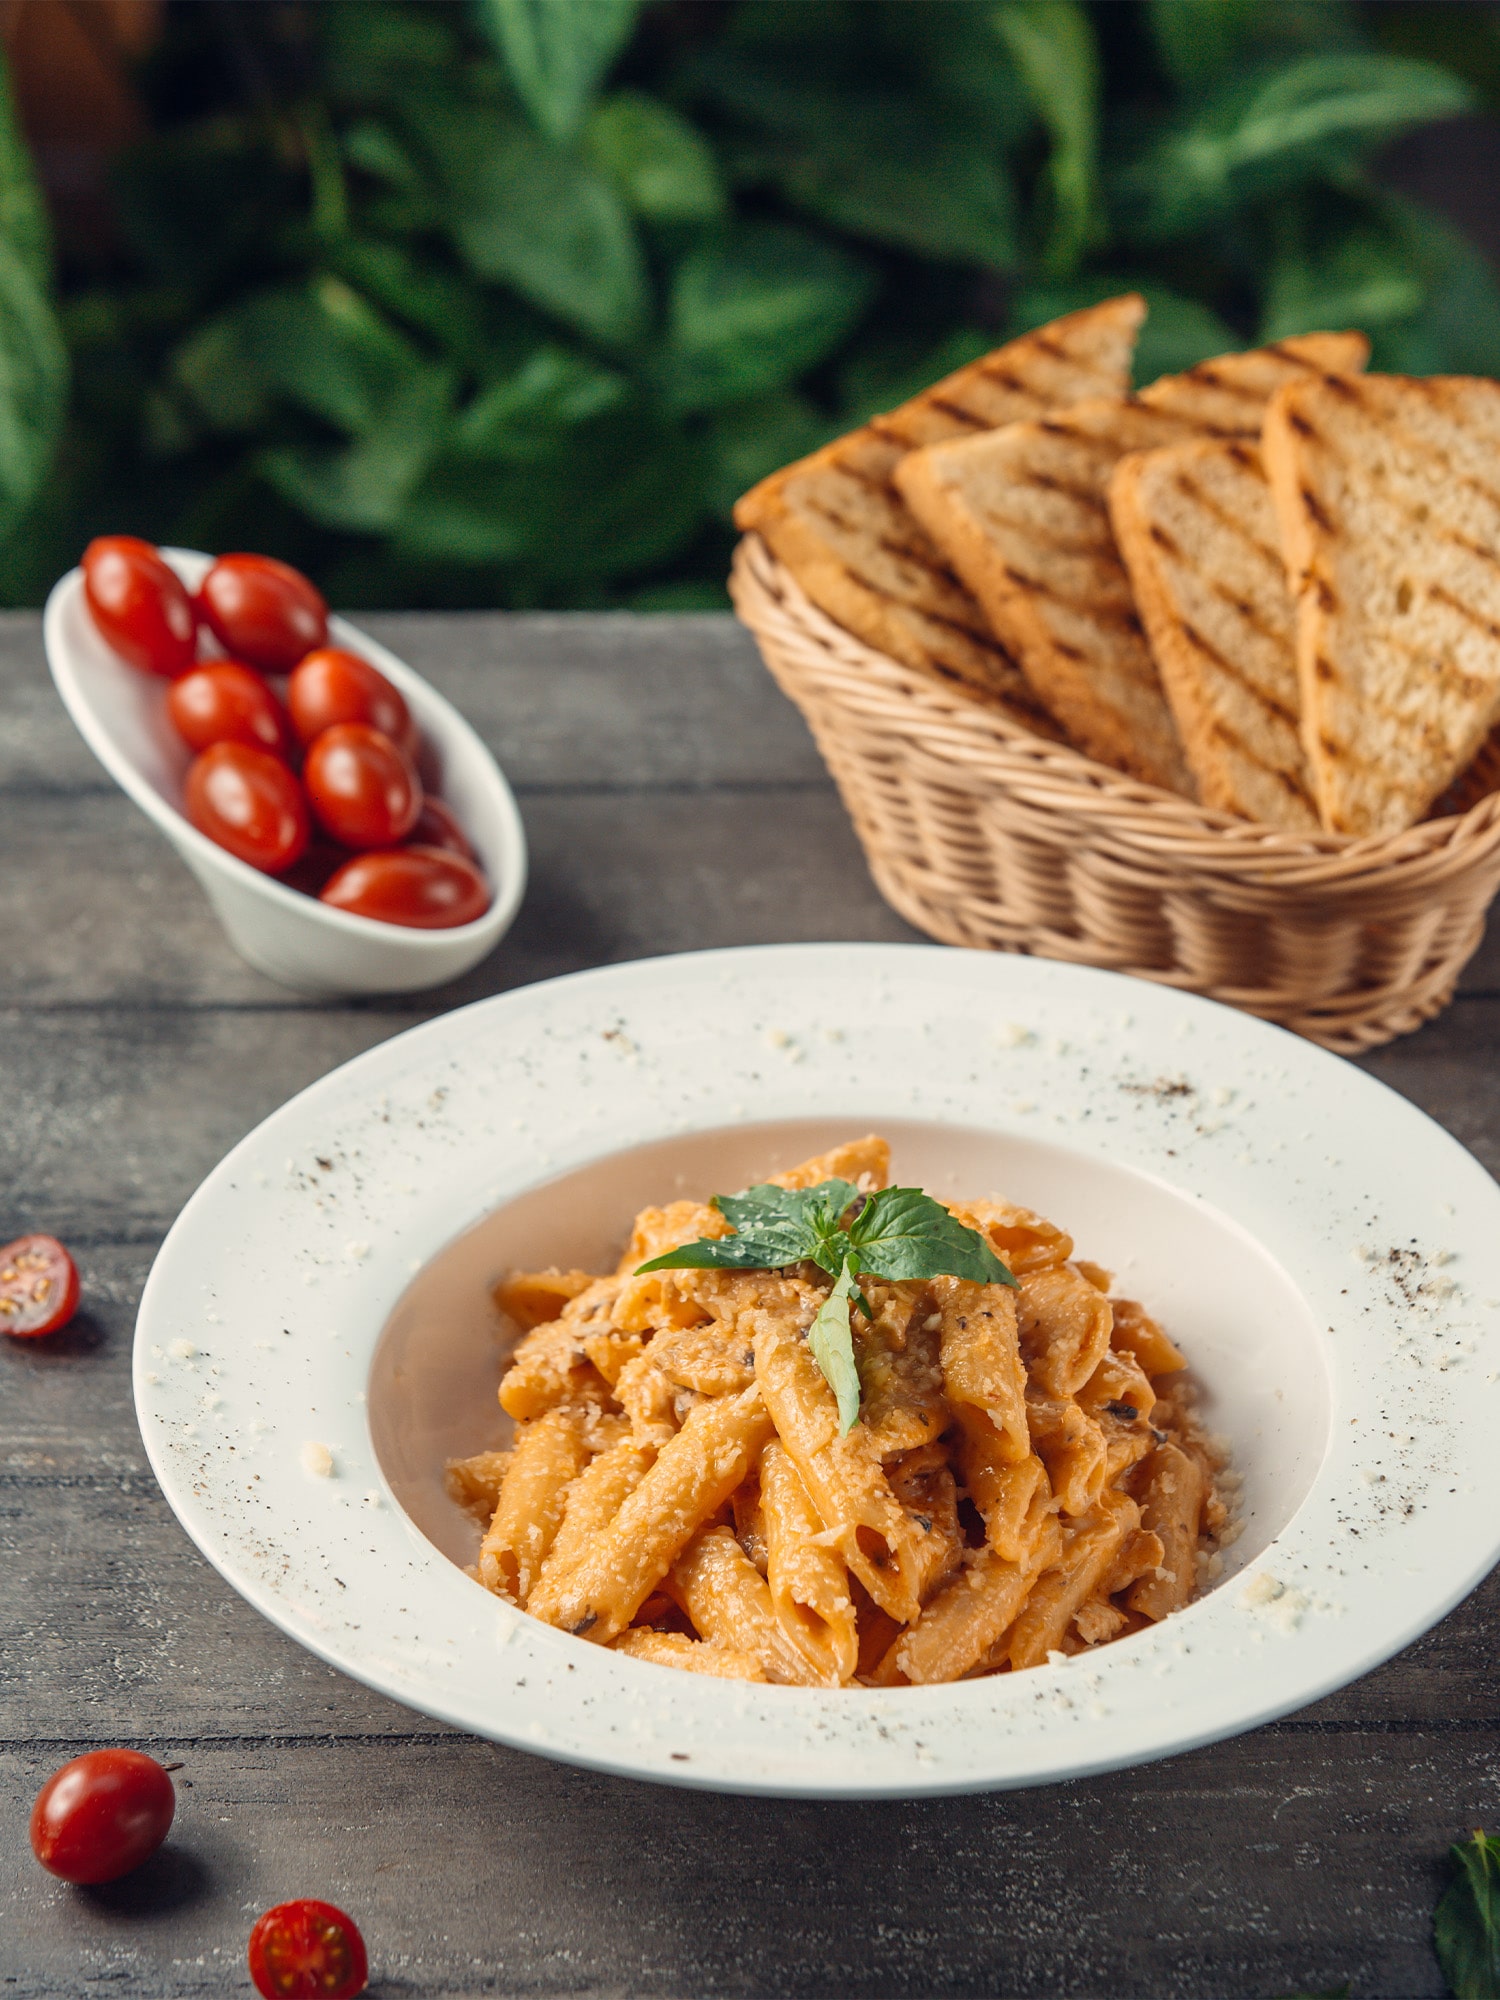 penne-pasta-tomato-sauce-served-with-toast-bread